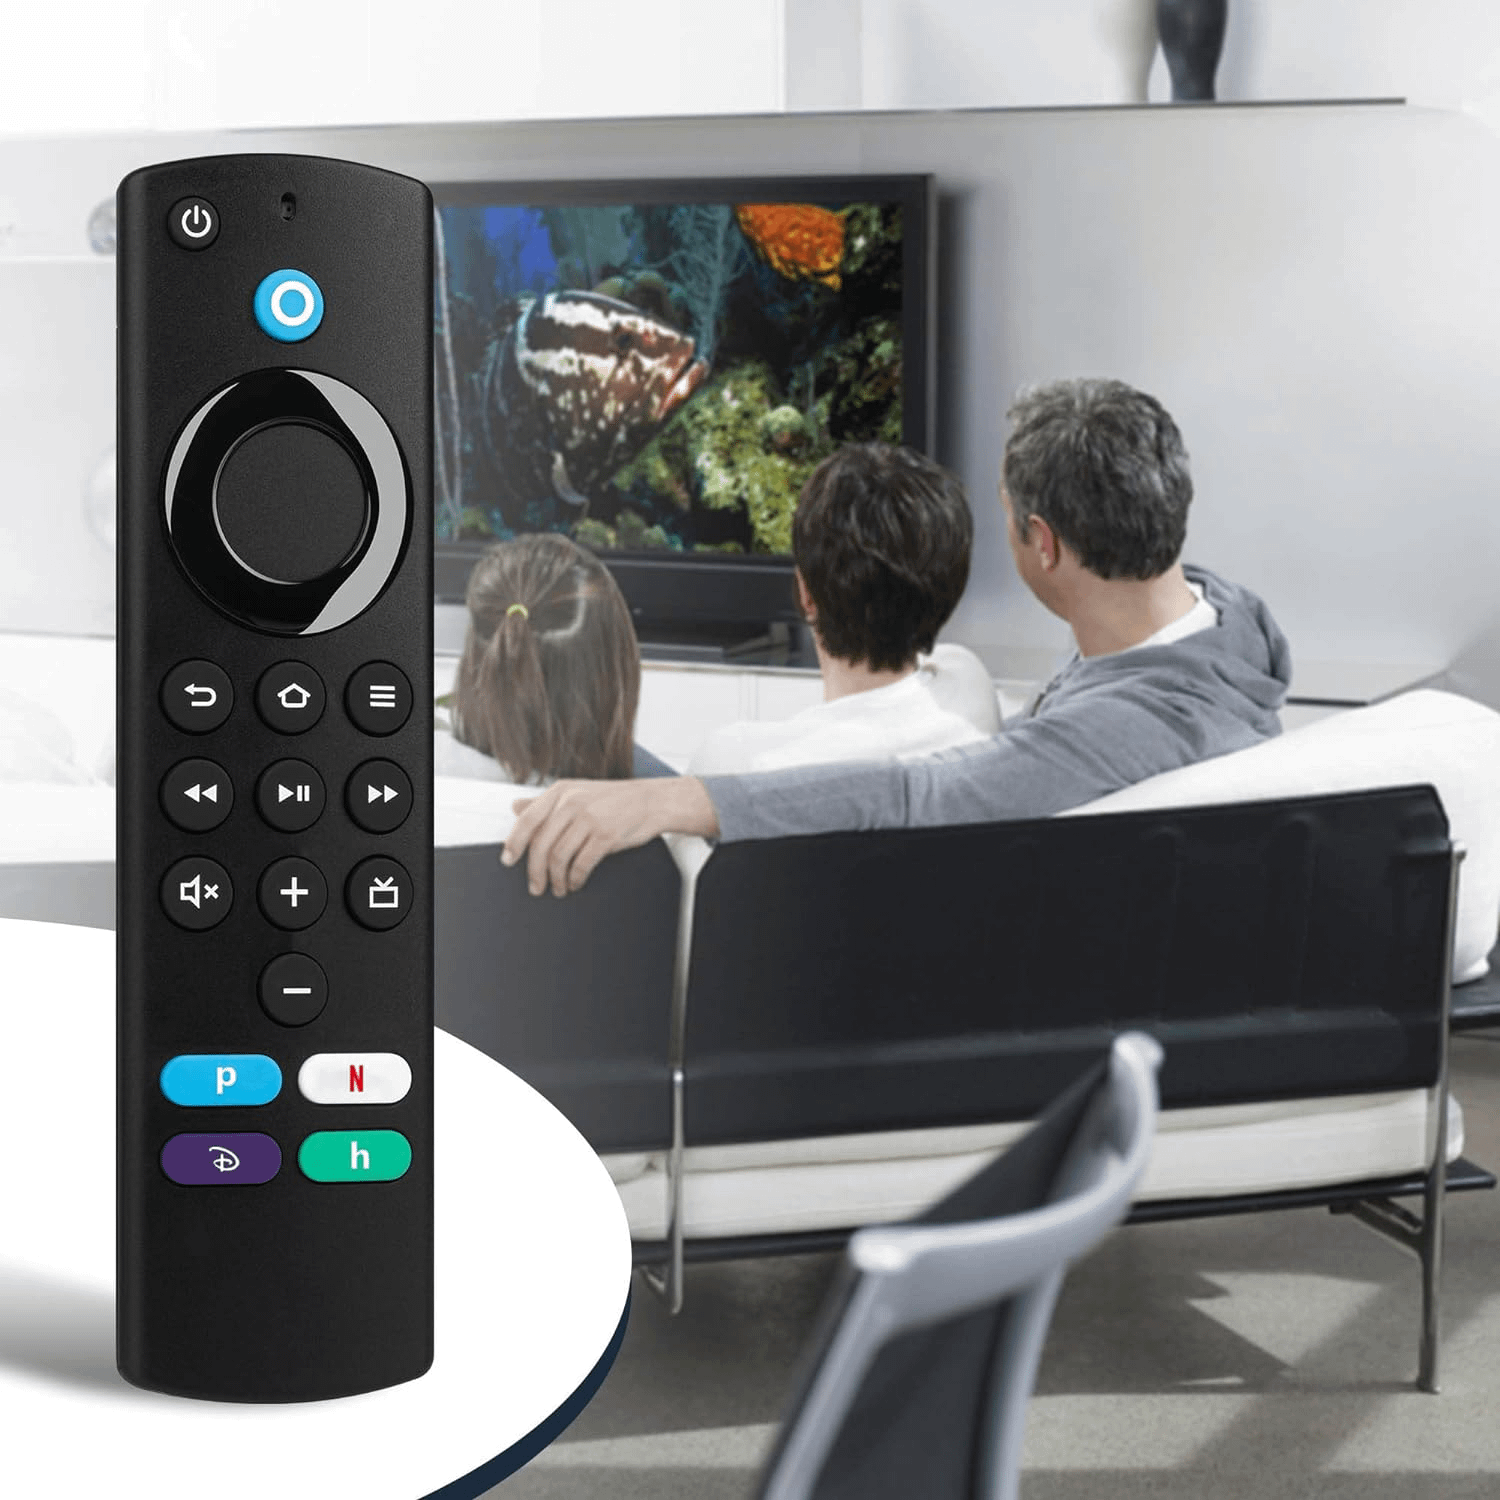 Firestick remote placed in front of a TV.